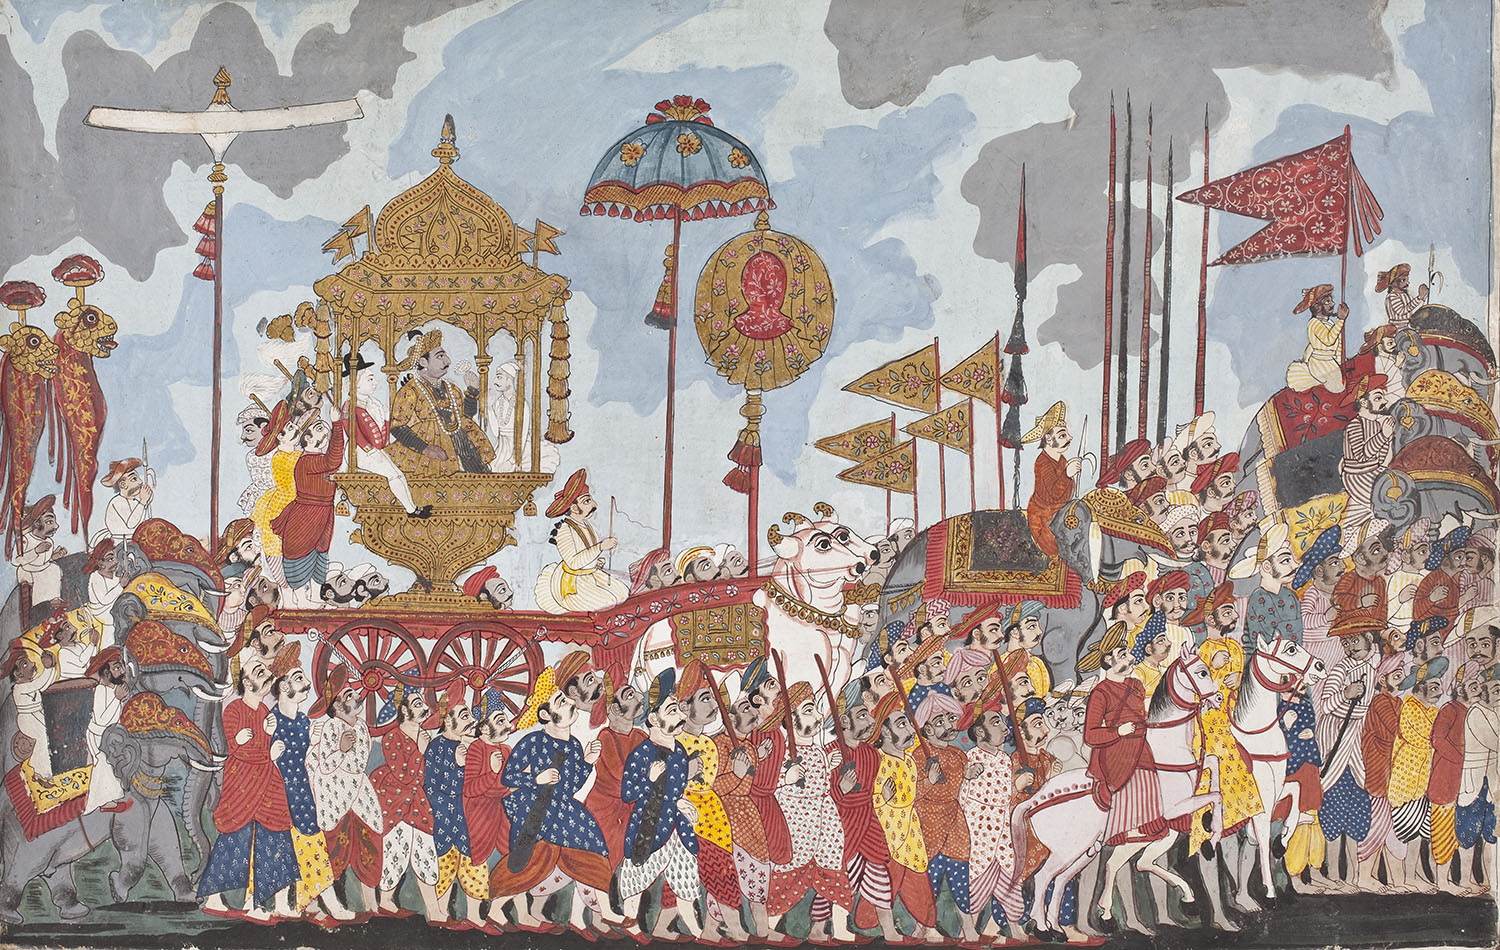 A painting depicting Amar Singh seated on an elephant, accompanied by a procession on foot carrying flags and umbrellas.